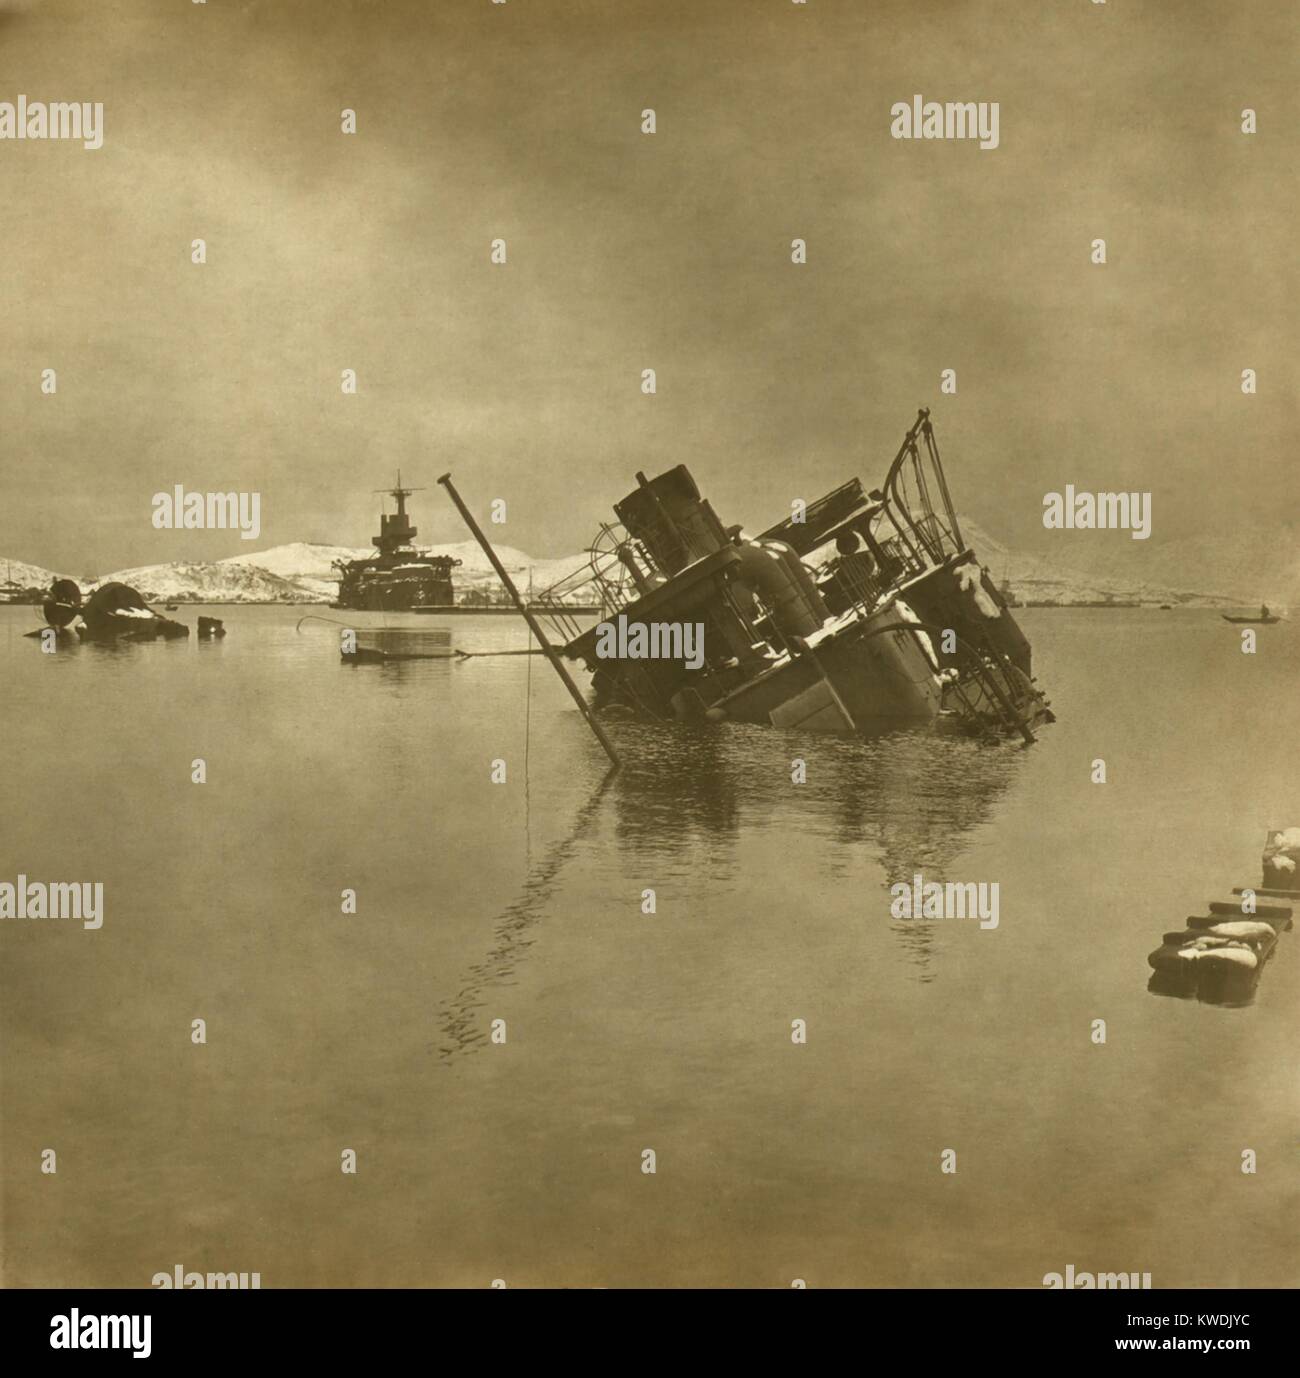 Sunken Russian warships, in Port Arthur Harbor, during the Russo Japanese War, Dec. 1904. Japanese 11-inch howitzer siege guns destroyed the blockaded ships. (BSLOC 2017 18 106) Stock Photo